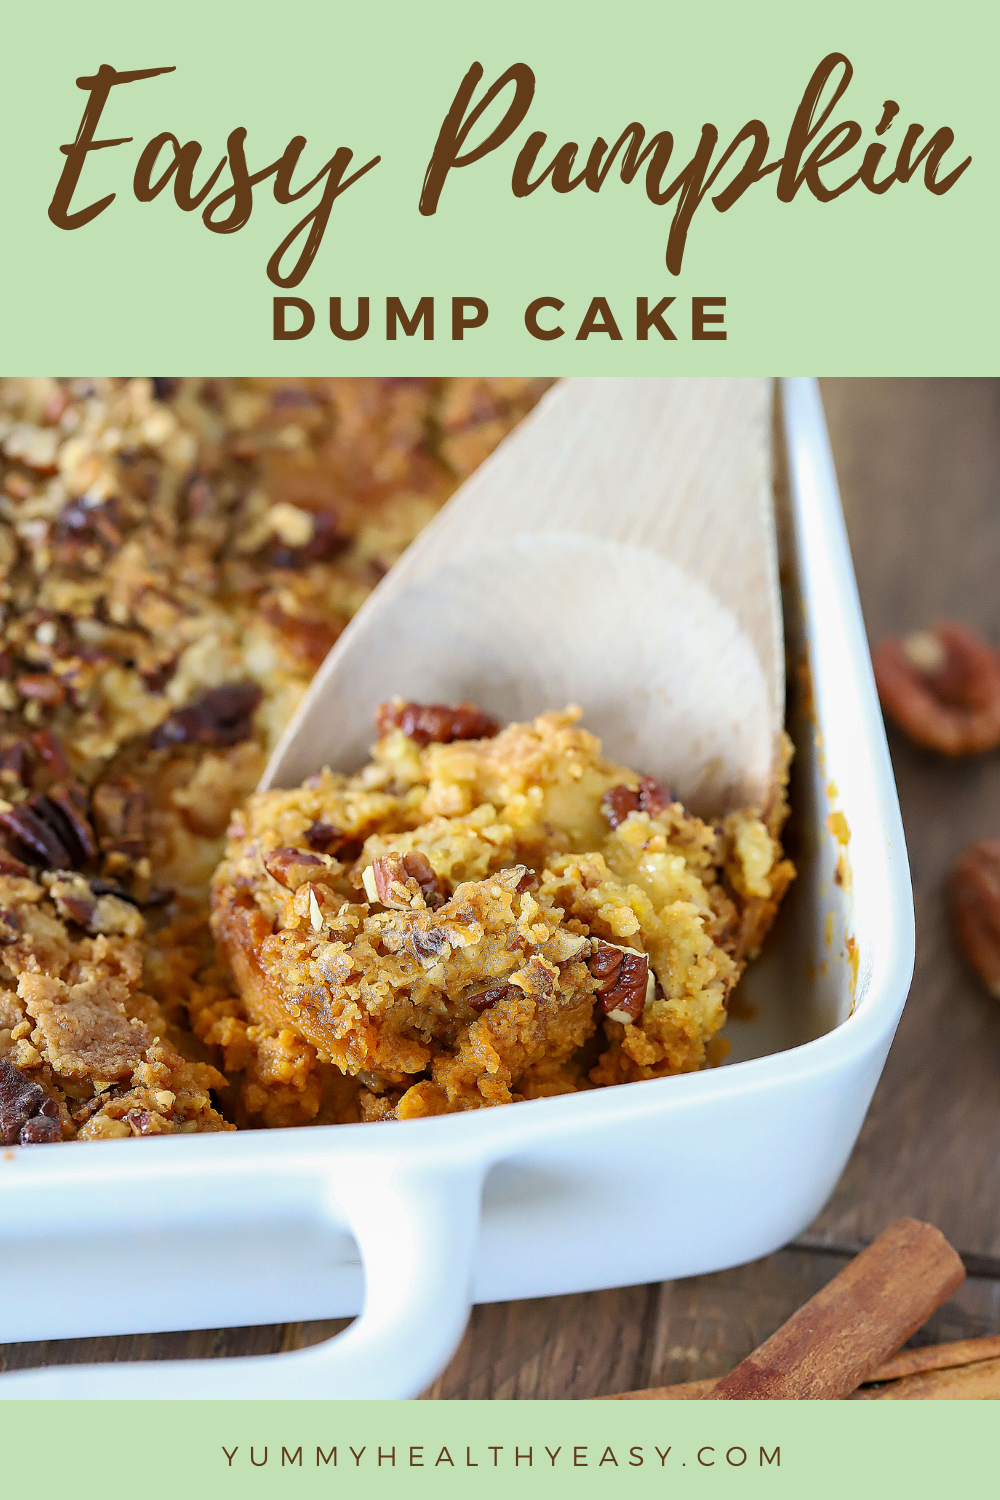 Ready for the best combination of flavors and textures? This Easy Pumpkin Dump Cake combines all the flavors of fall, only has a few ingredients, is quick to whip up and tastes incredible! via @jennikolaus